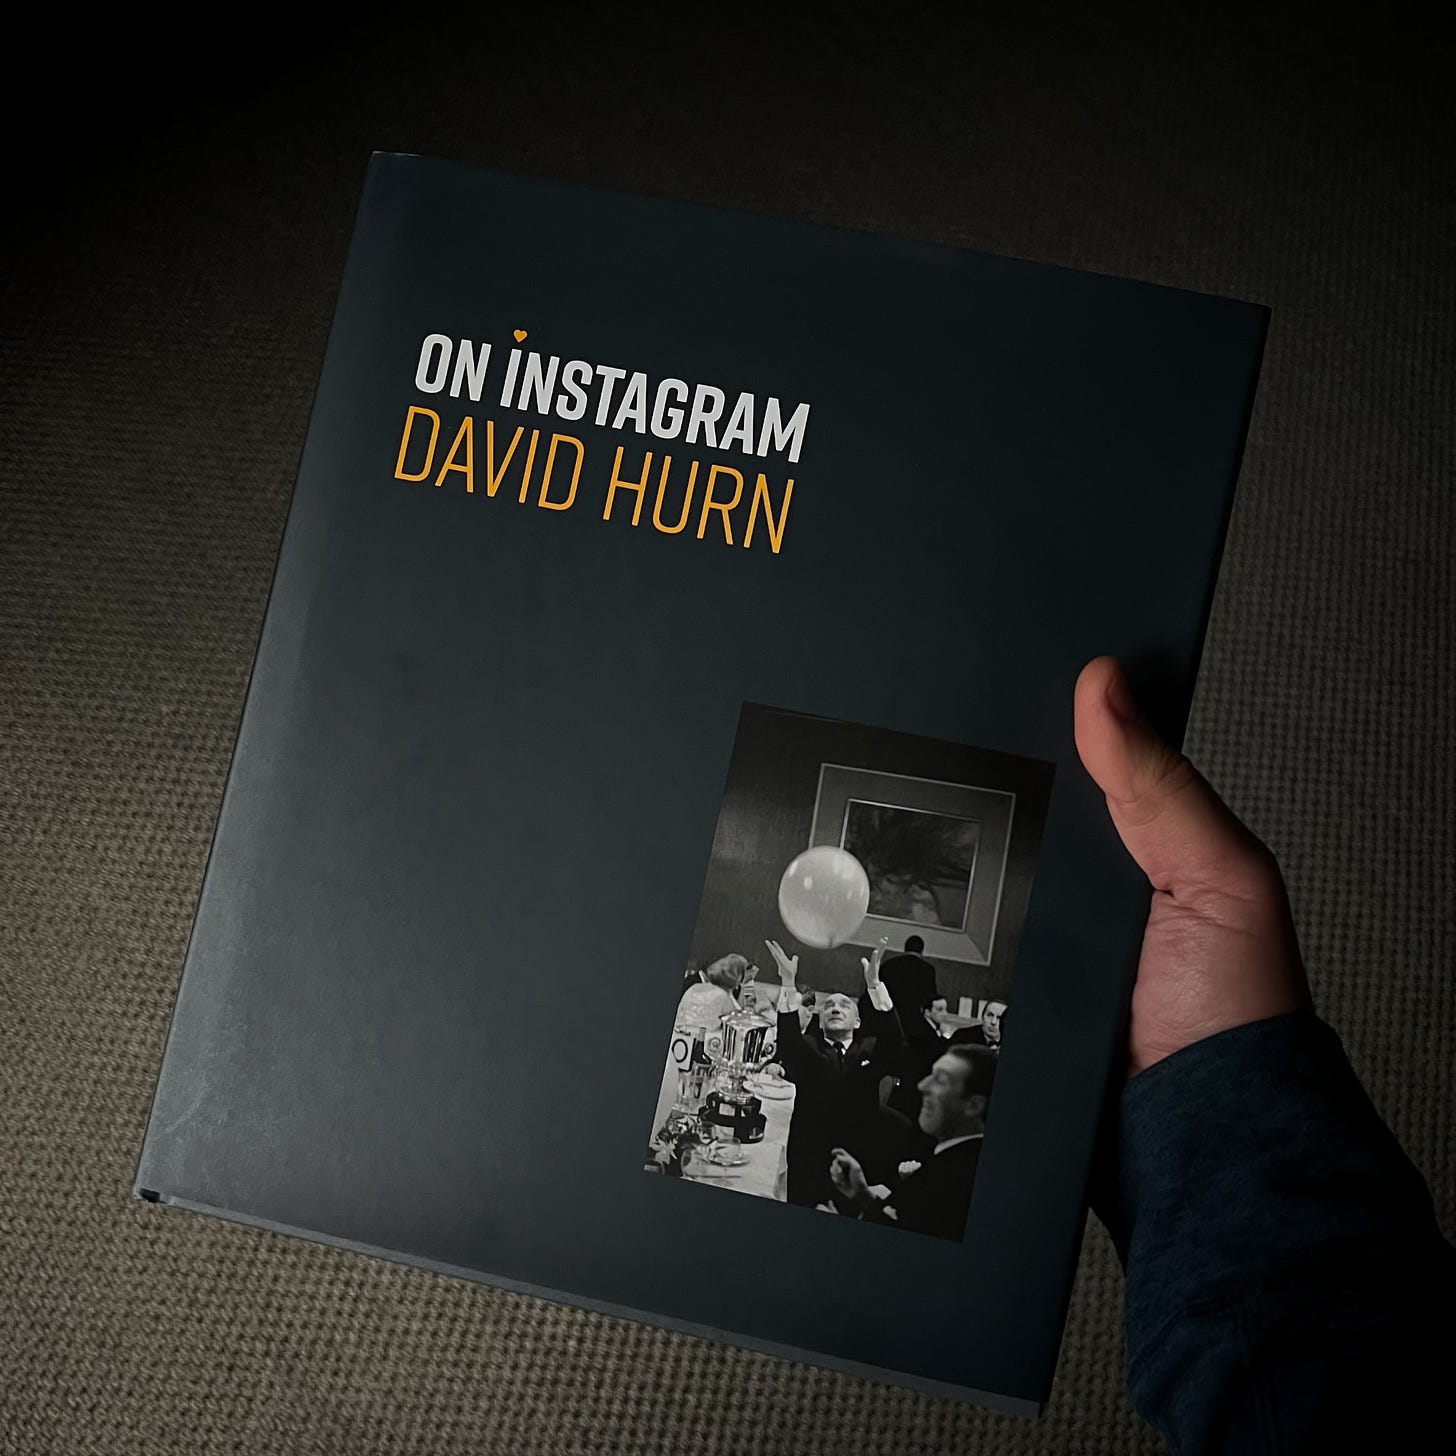 The photograph book being held the title is on Instagram Instagram David Hurn